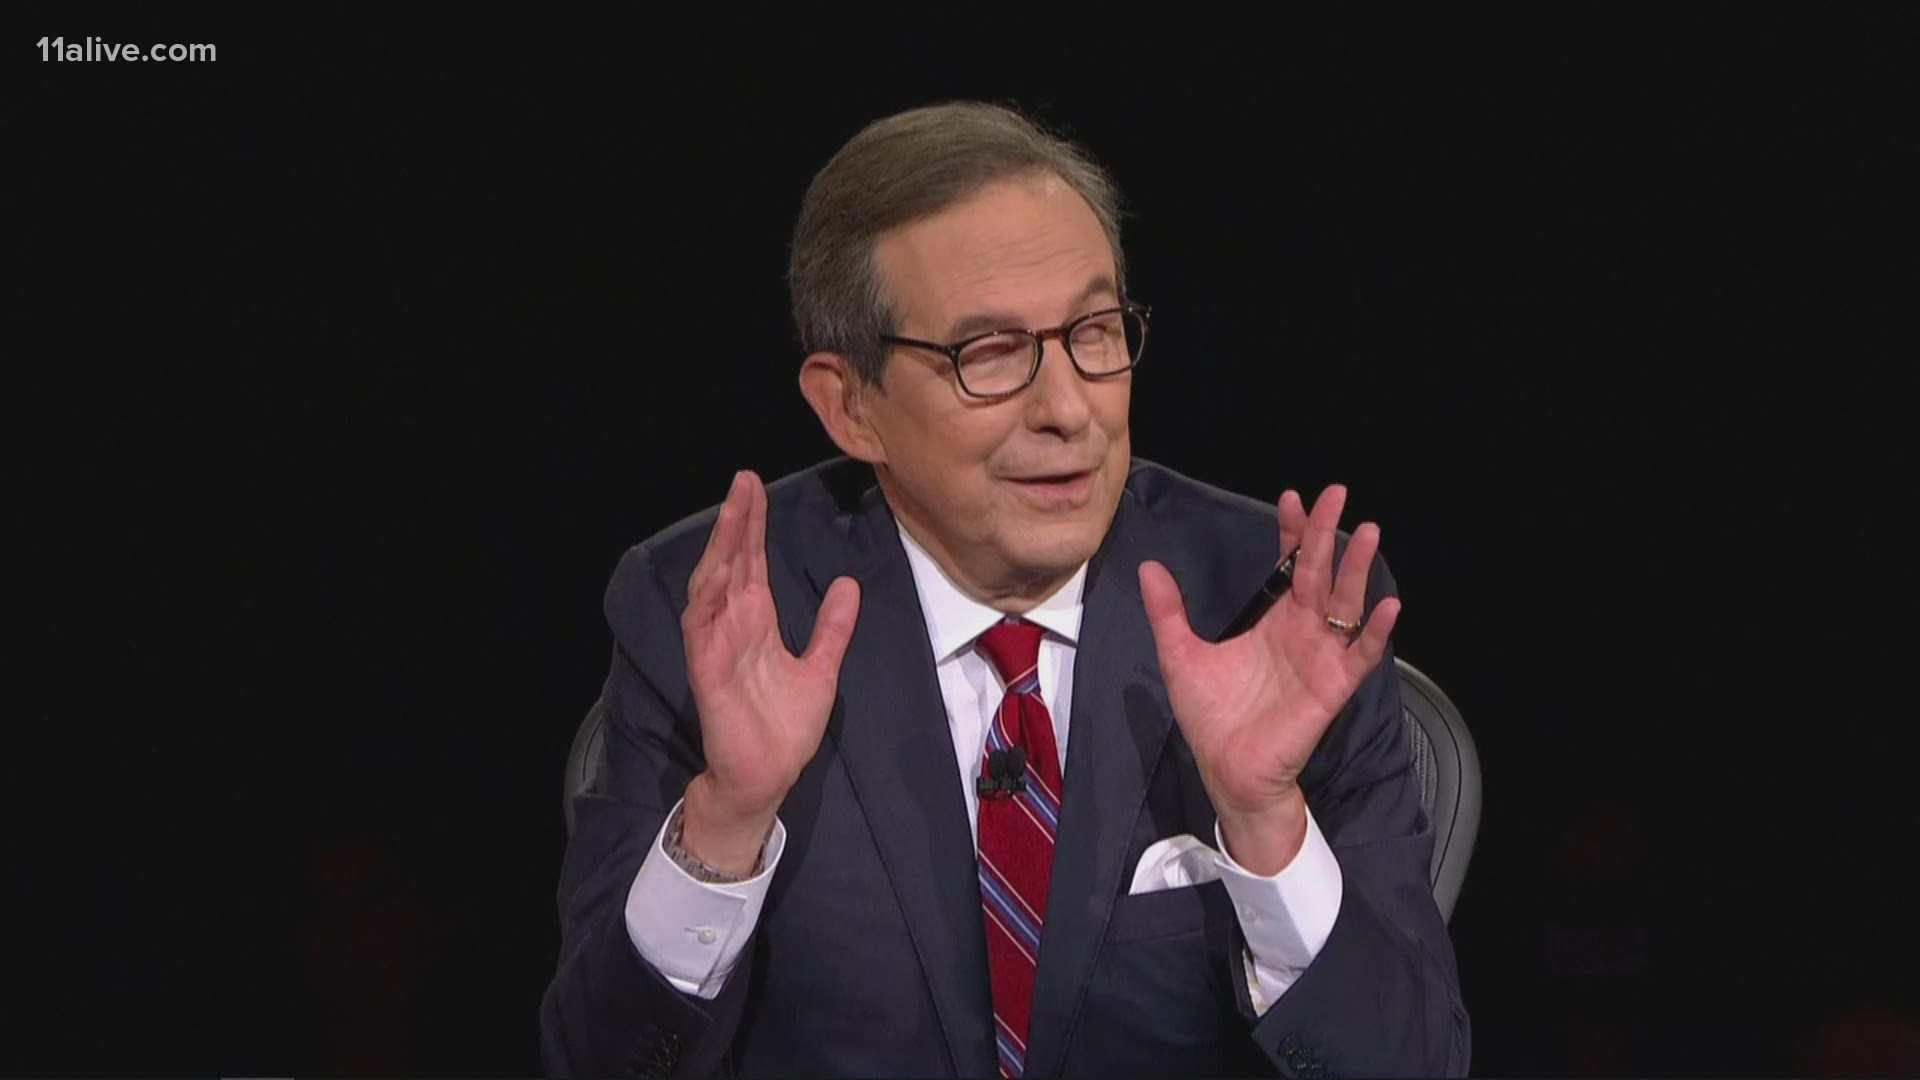 In one of many contentious moments during the presidential debate, moderator Fox News' Chris Wallace tries to encourage President Trump to stop interrupting.